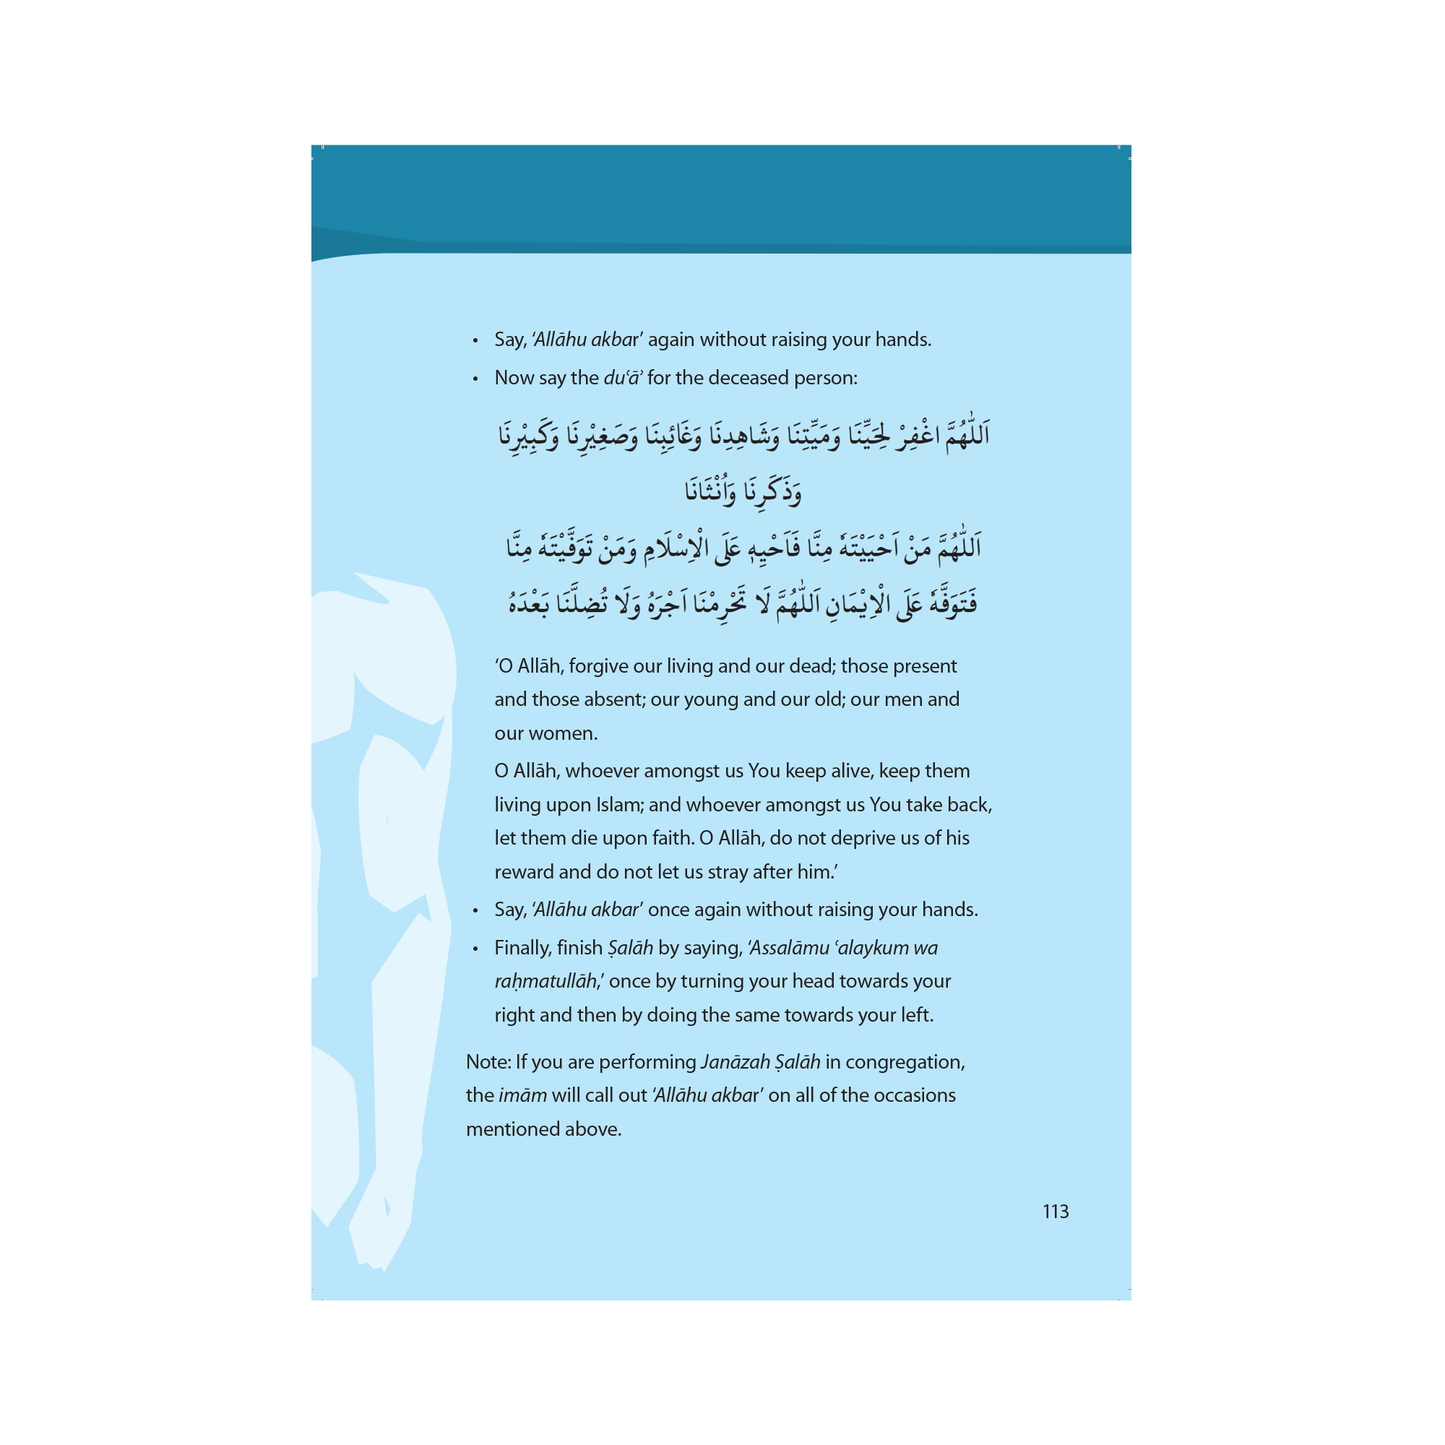 Islamic Studies: Textbook 6 – Learn about Islam Series by Safar